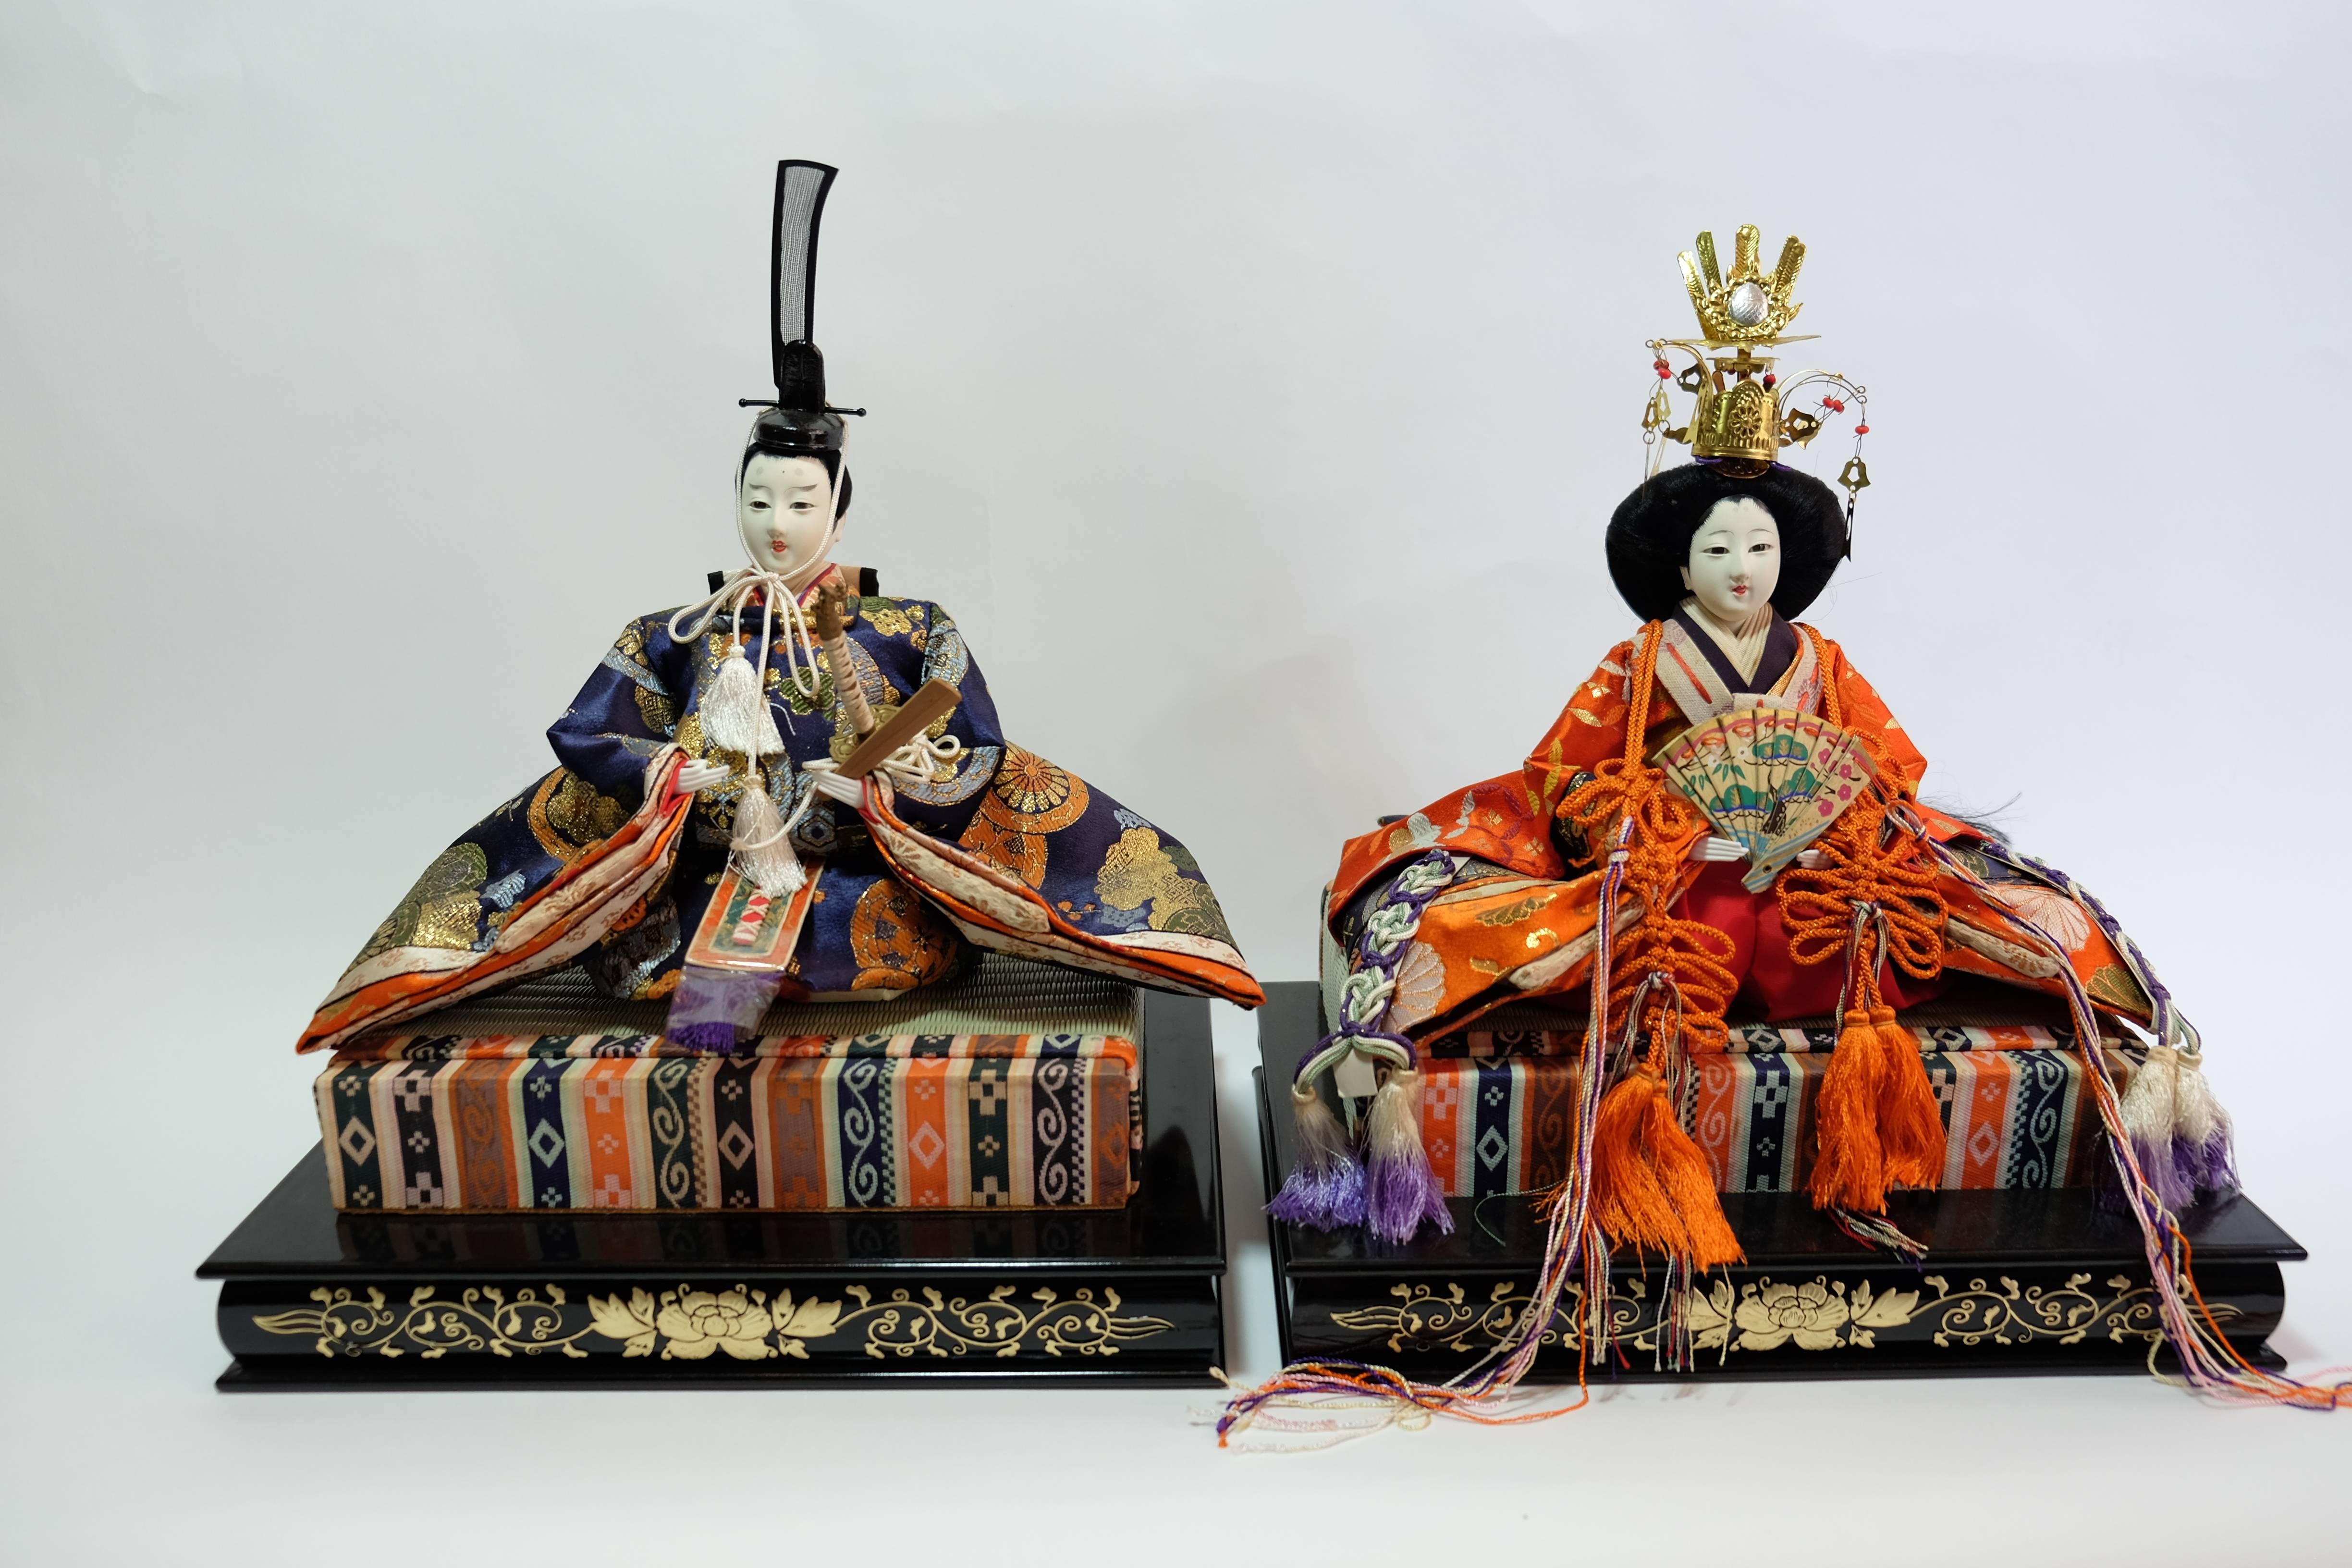 Japanese Emperor and Empress dolls for Doll's Festival Hinamatsuri.

Hinamatsuri (Doll’s Festival) is an occasion to pray for young girls’ growth and happiness, and celebrated each year on March 3 in Japan.
Most families with girls display dolls